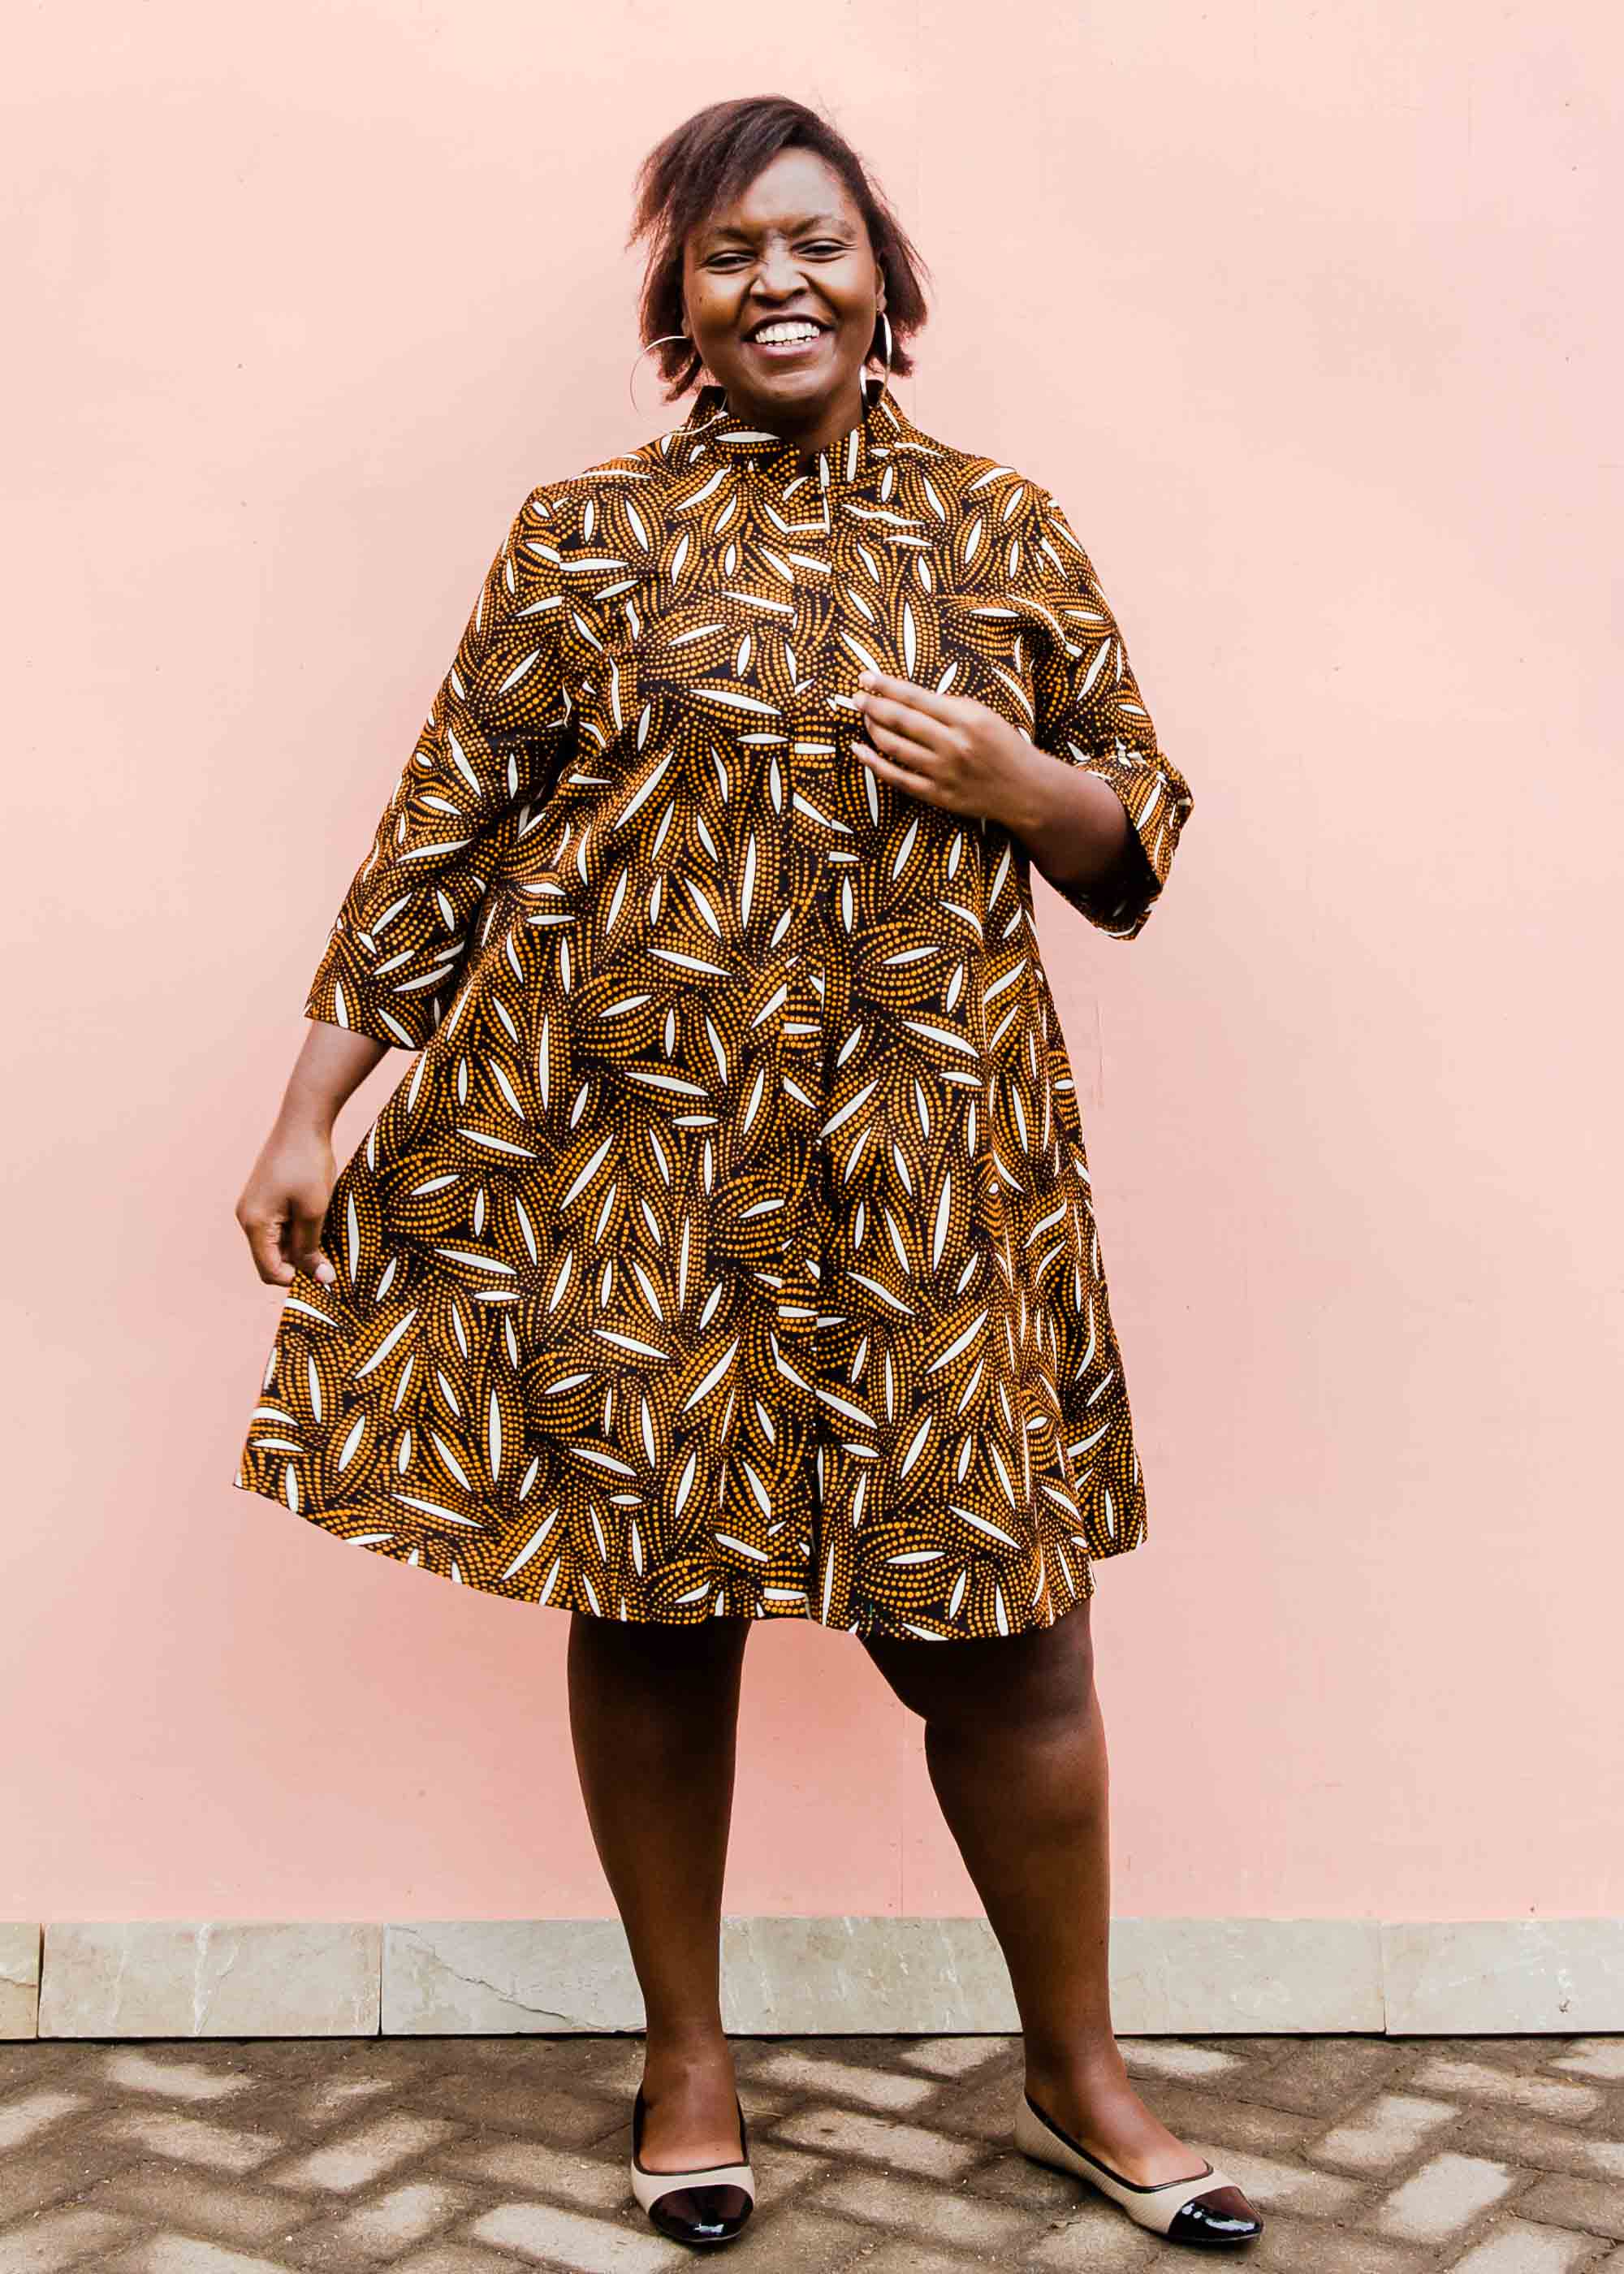 model wearing a brown, black and white seed design dress